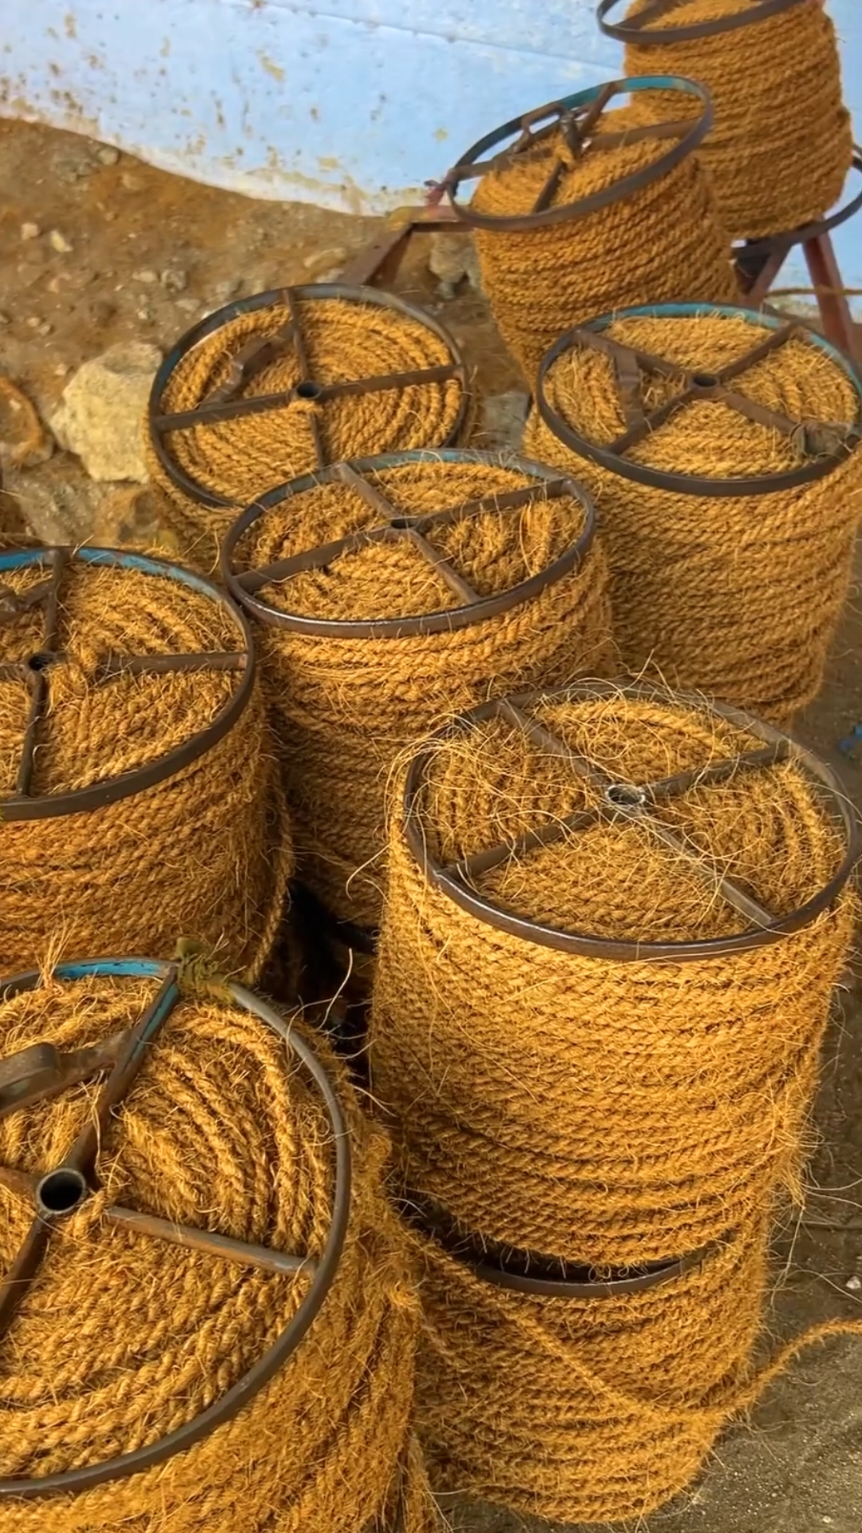 #COCONUT #ROPE #MANUFACTURING #AMAZING #FACTORY #PROCESS 